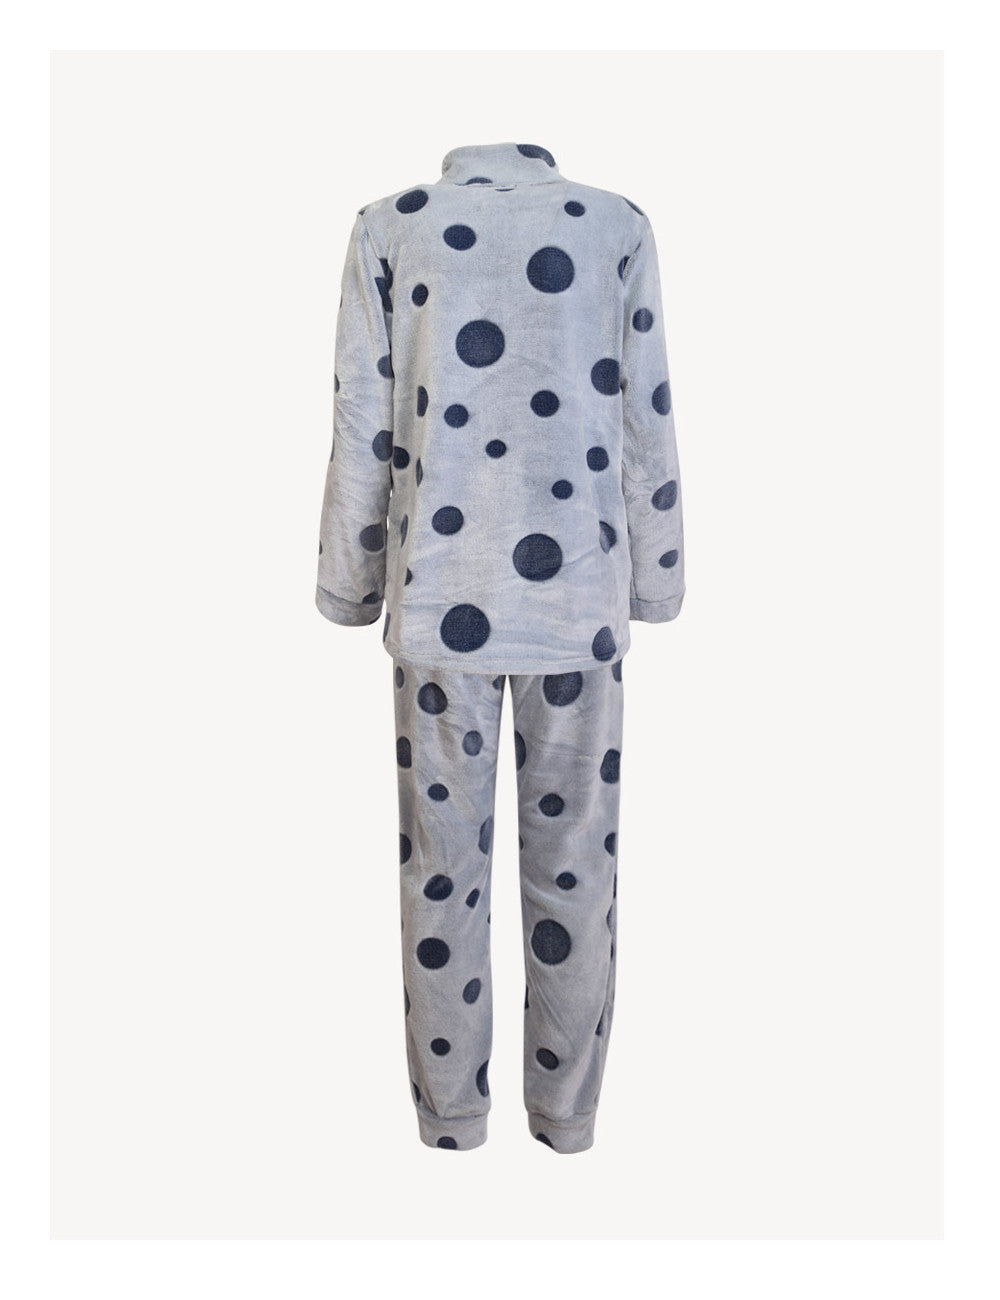 ack of the Long sleeve and long pants plush pajamas set with bubble designed fabric by SIeLEI from Italy